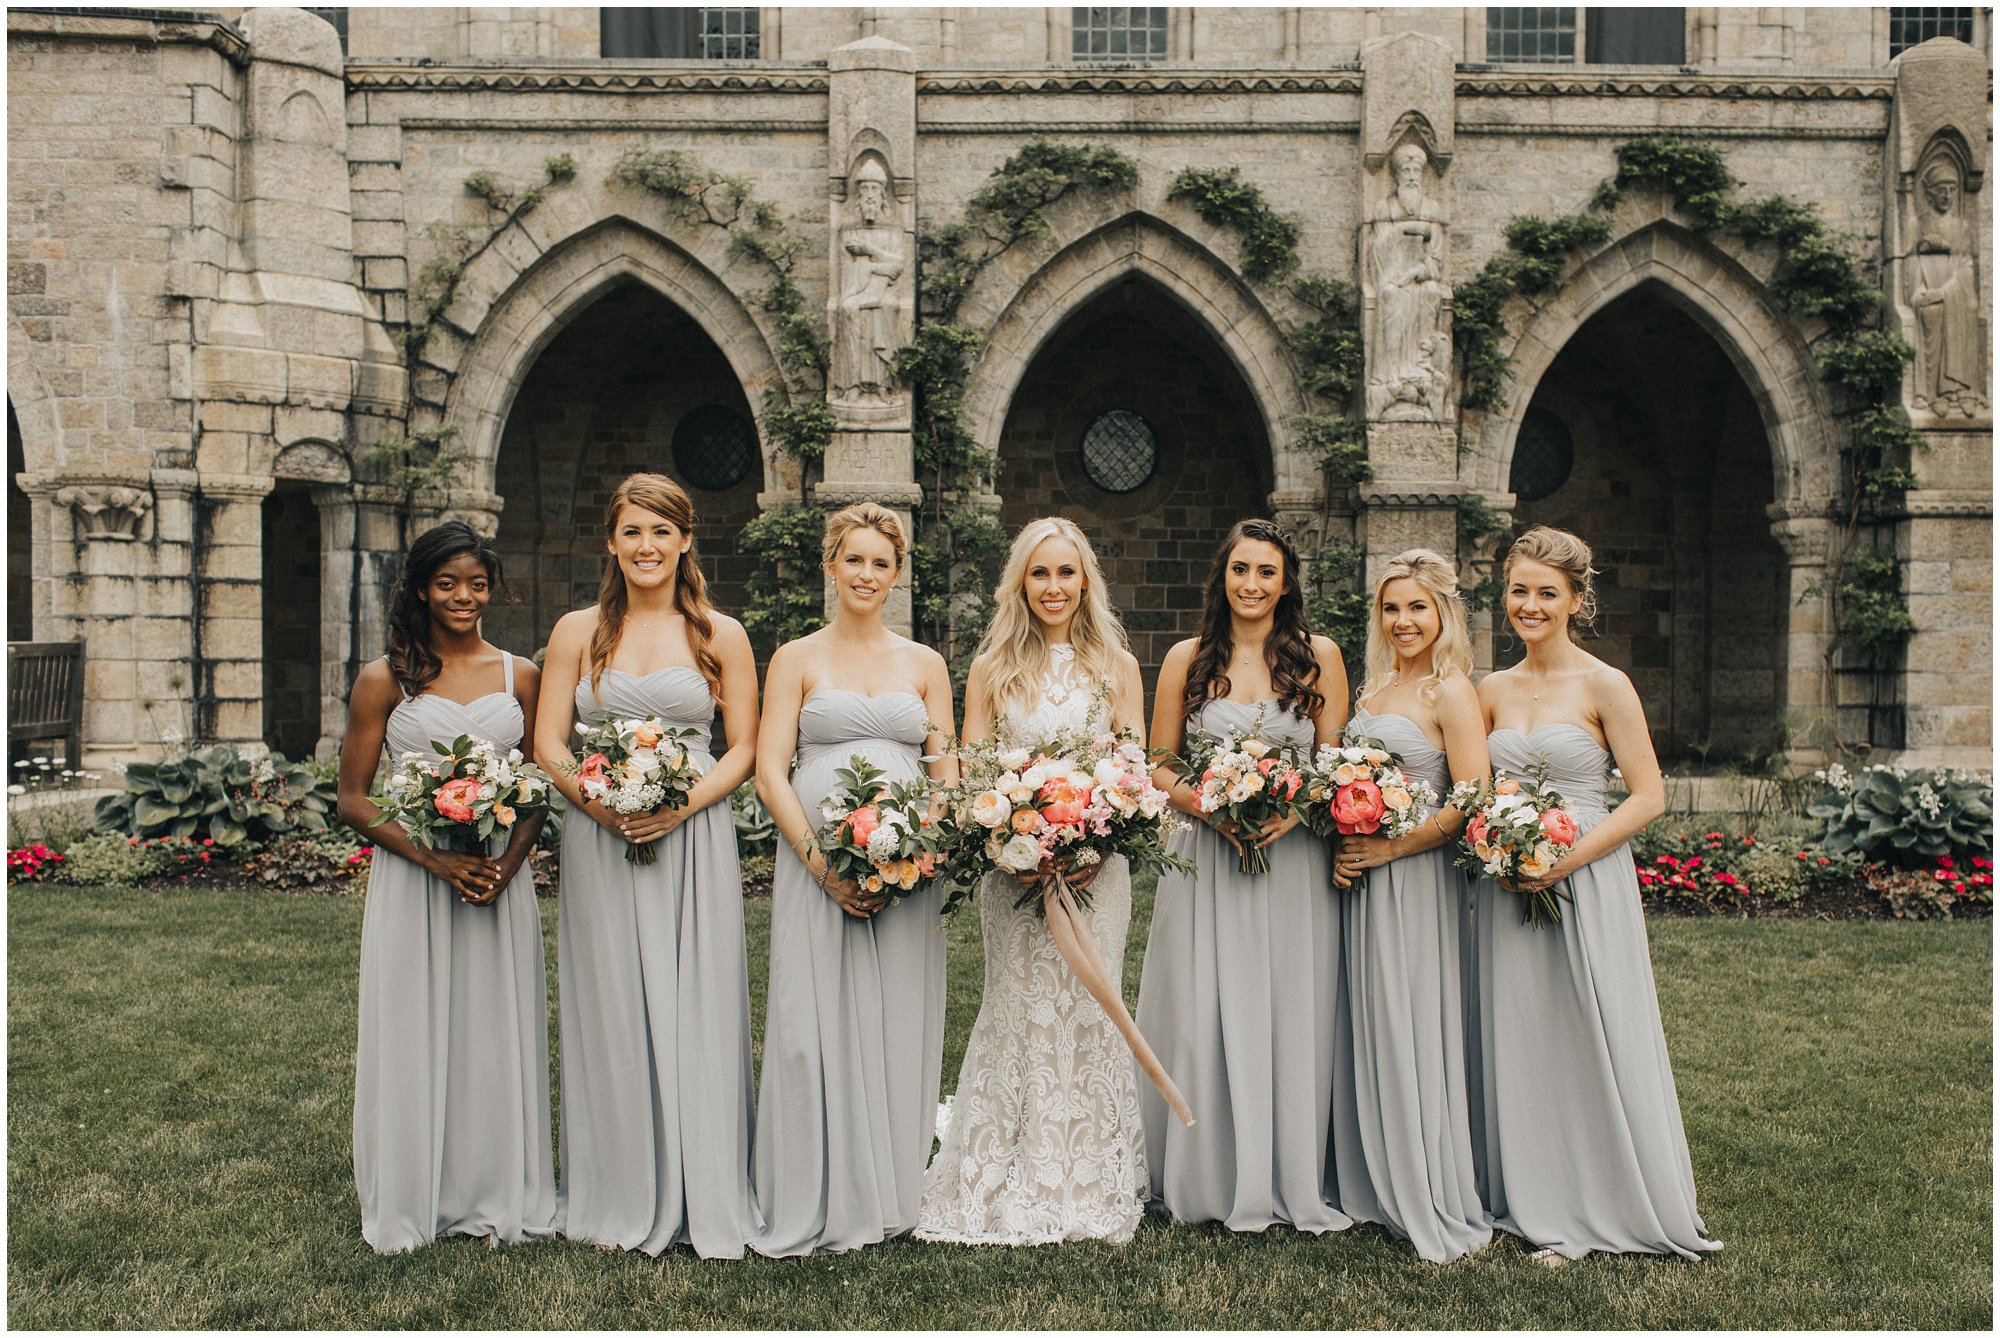 cairnwood wedding photographer, bridal party soft tones, lulus dresses, faye and renee floral